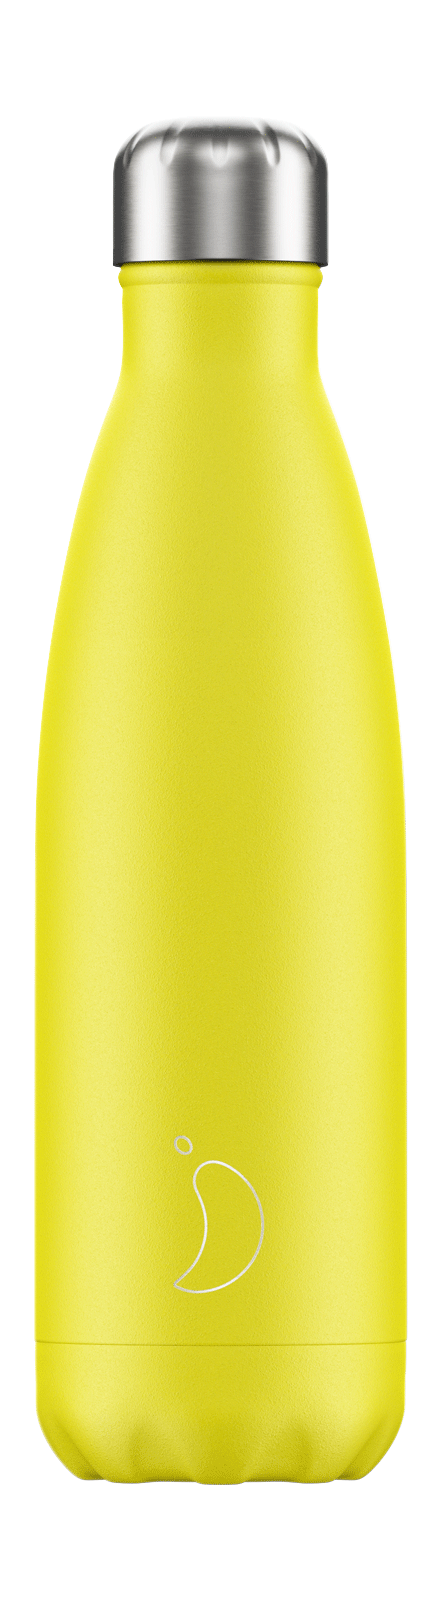 cadeauxwells - 500ml Chilly's Bottle - Neon Yellow - Chilly's Bottles - Homewares